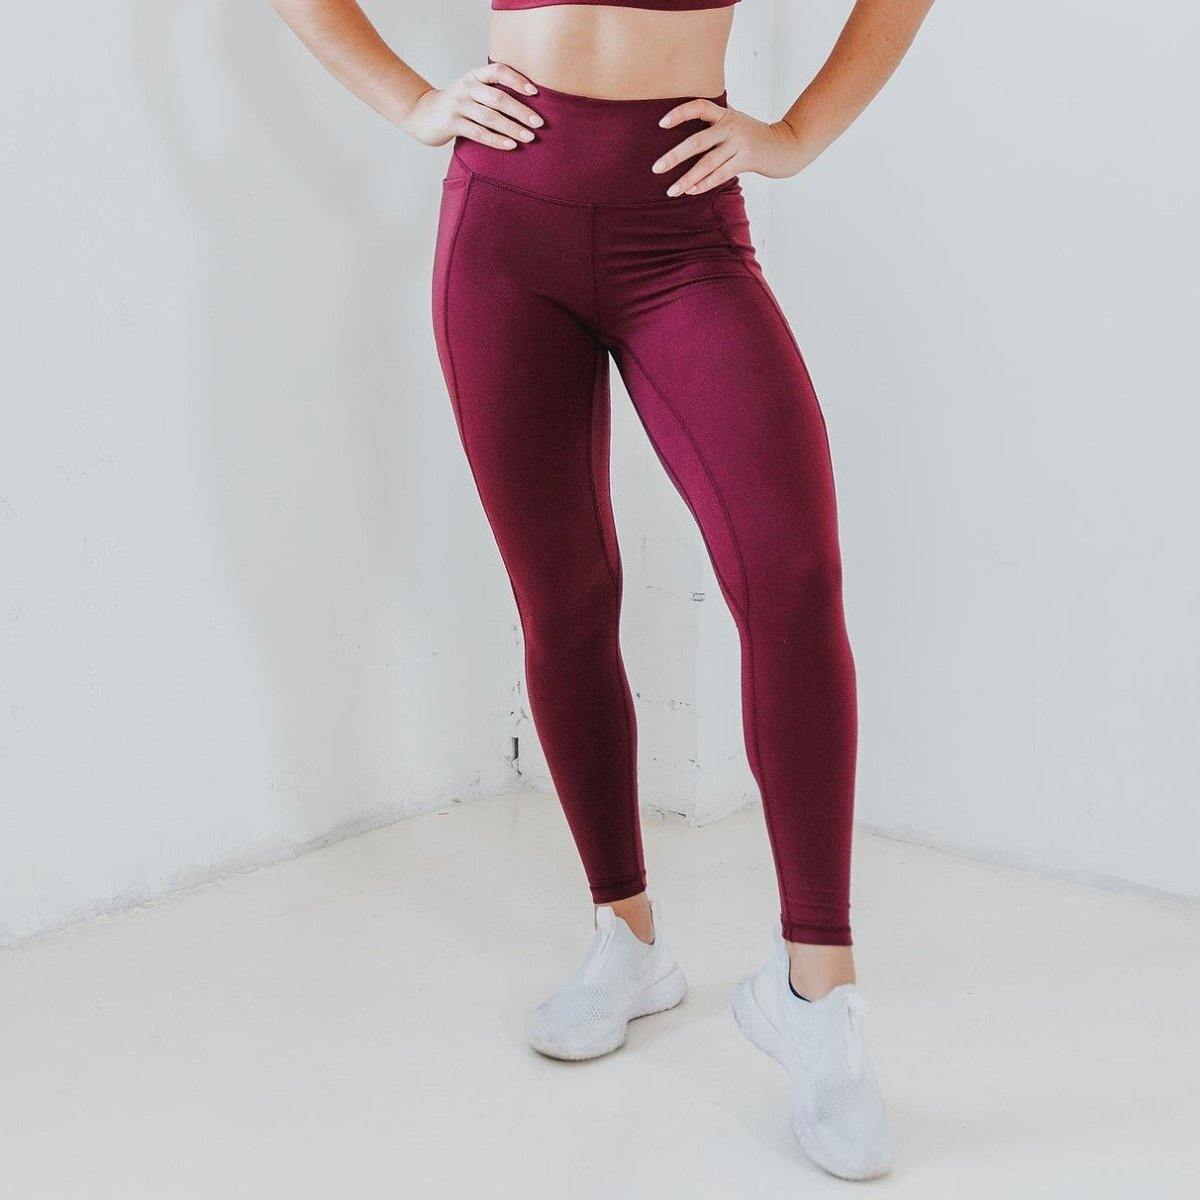 alphalete on X: Our Lilac Revival legging is in stock now.    / X